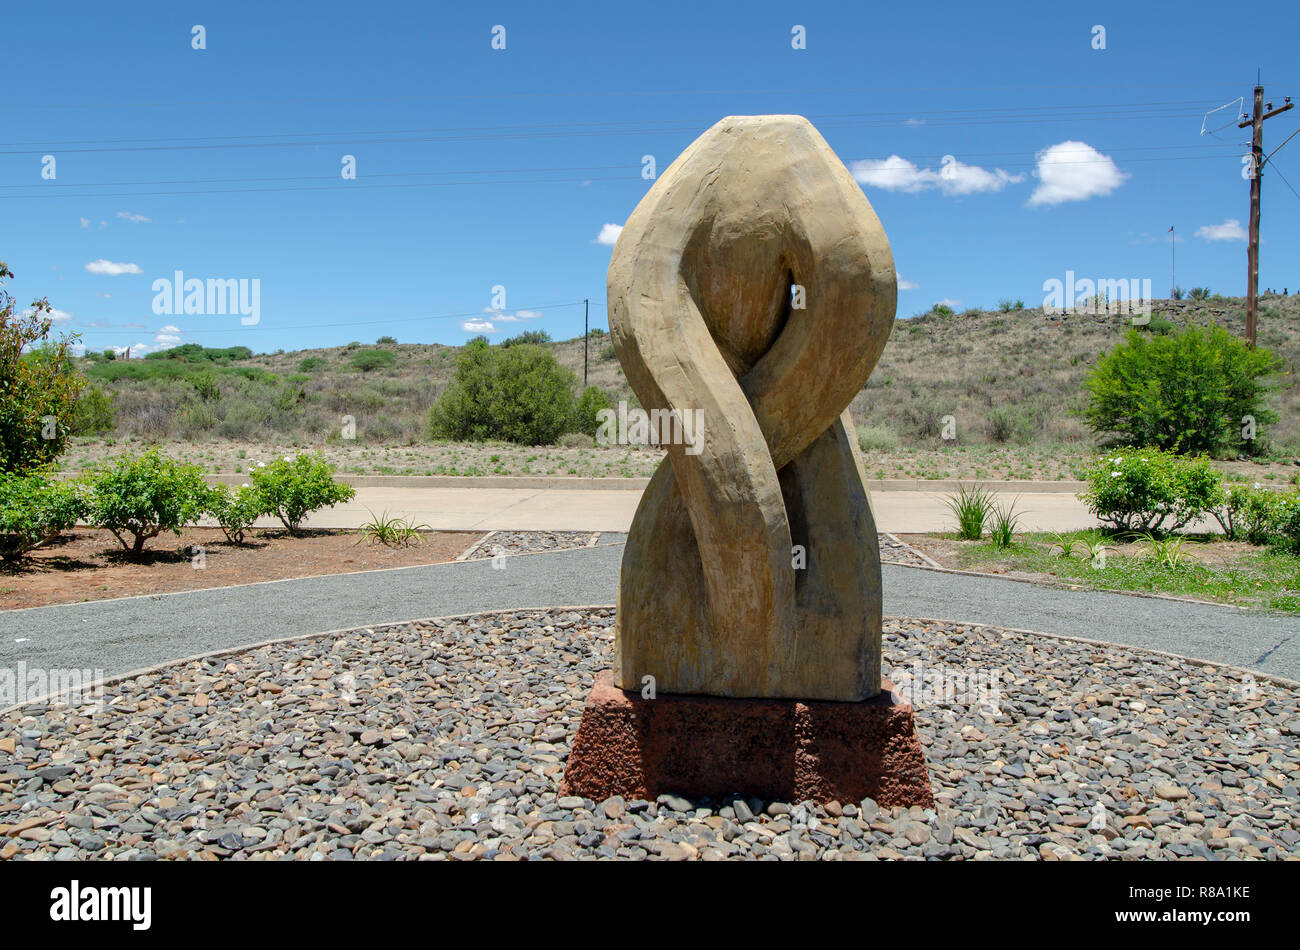 The Koeksister monument in Orania, in the Northern Cape, Friday, December 13, 2013. Orania is an Afrikaner (only) town located along the Orange River in the Karoo. Photo: Eva-Lotta Jansson Stock Photo